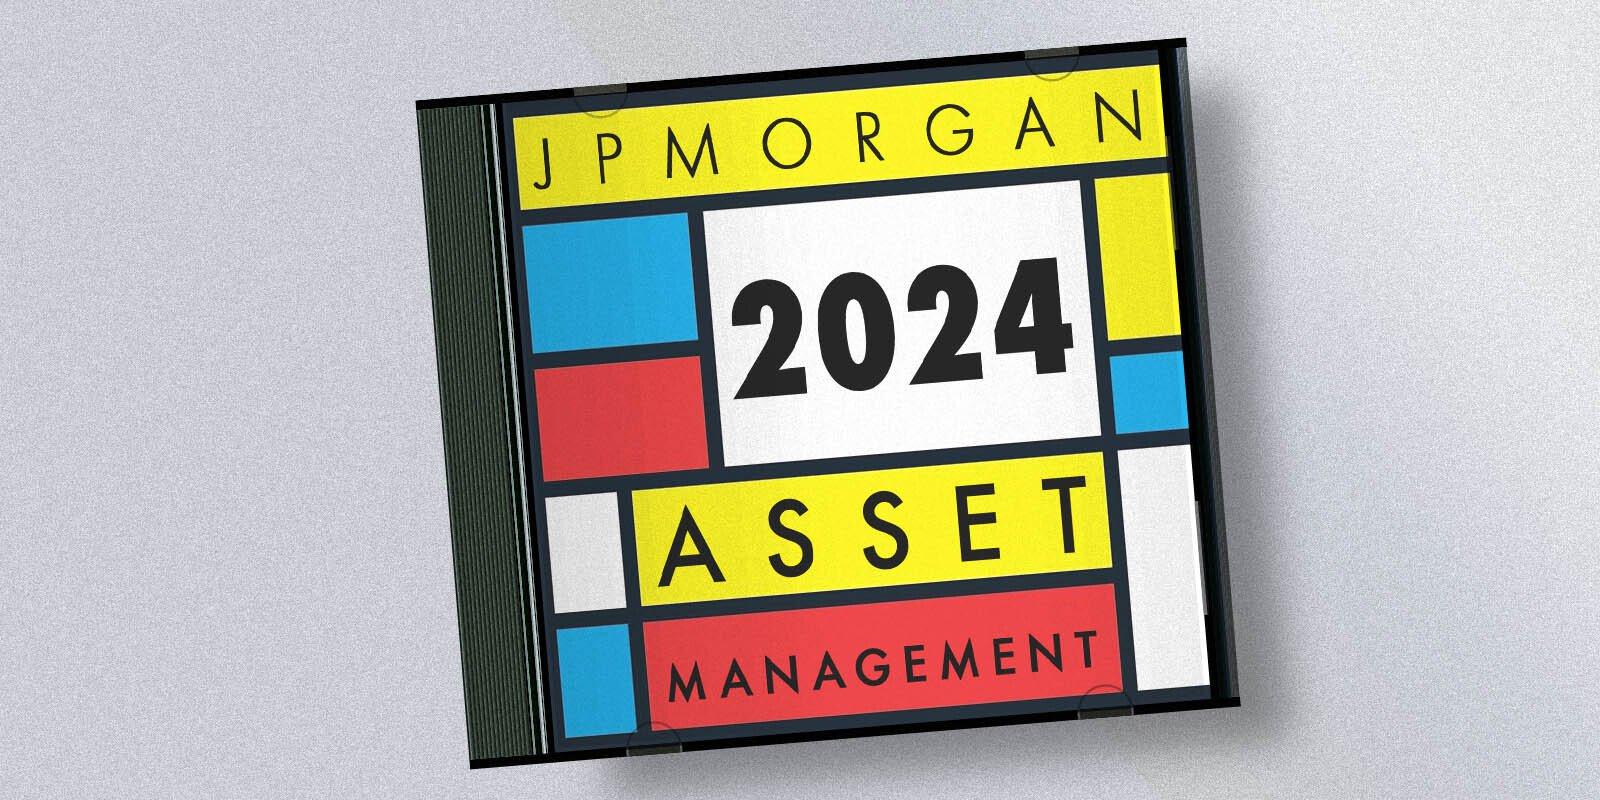 JPMorgan Asset Management Thinks It’s Too Soon To Celebrate